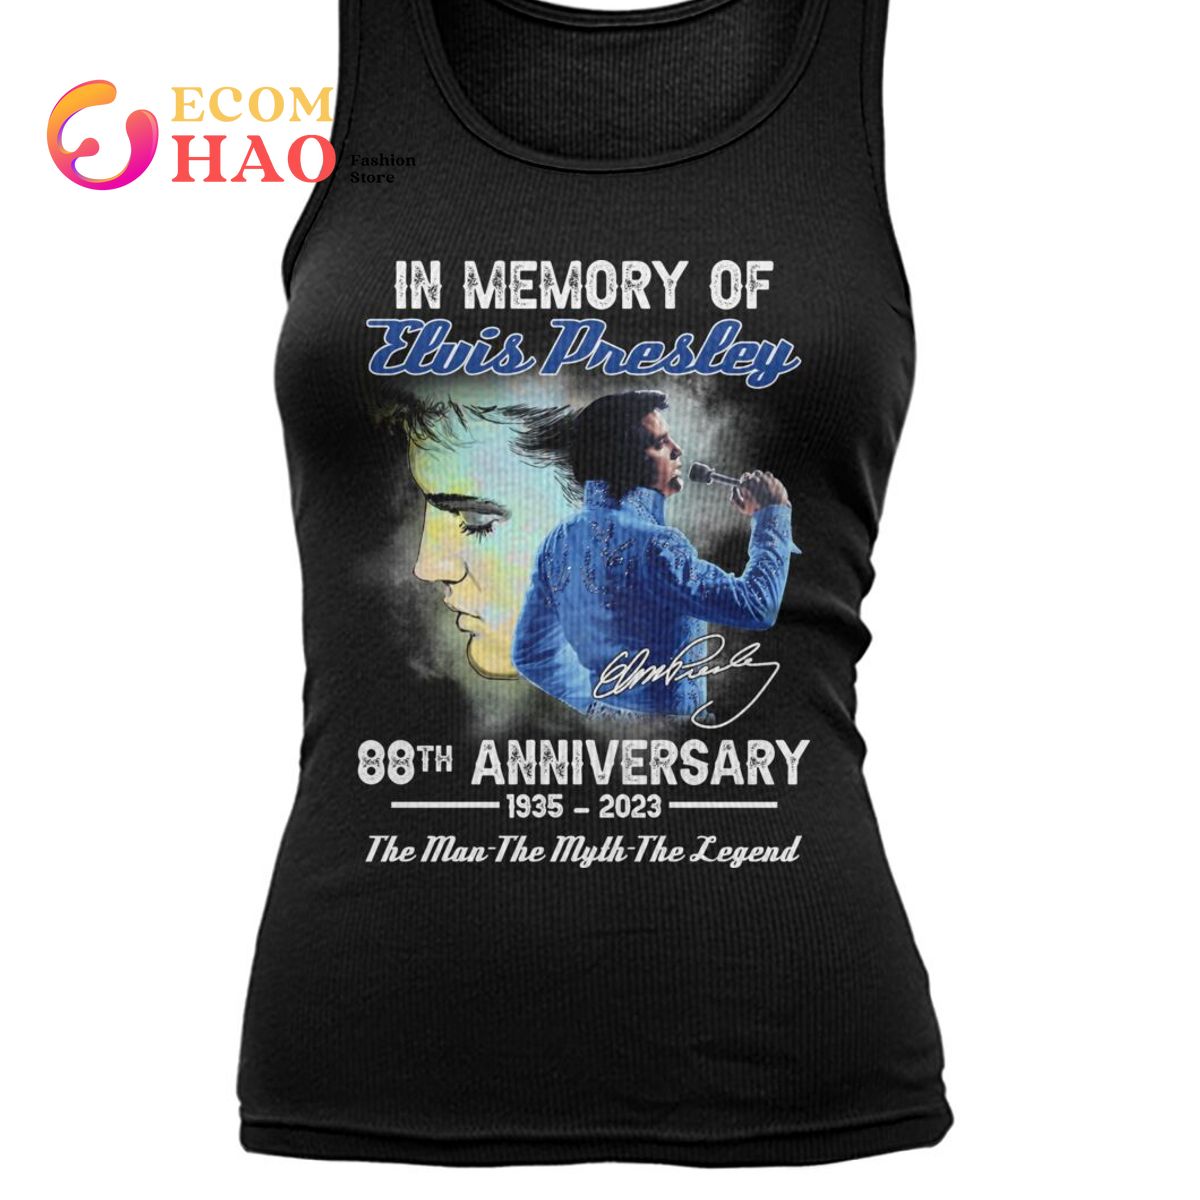 In Memory Of Elvis Presley 88th Annversary 1935-2023 The Man The Myth The Legend T-Shirt